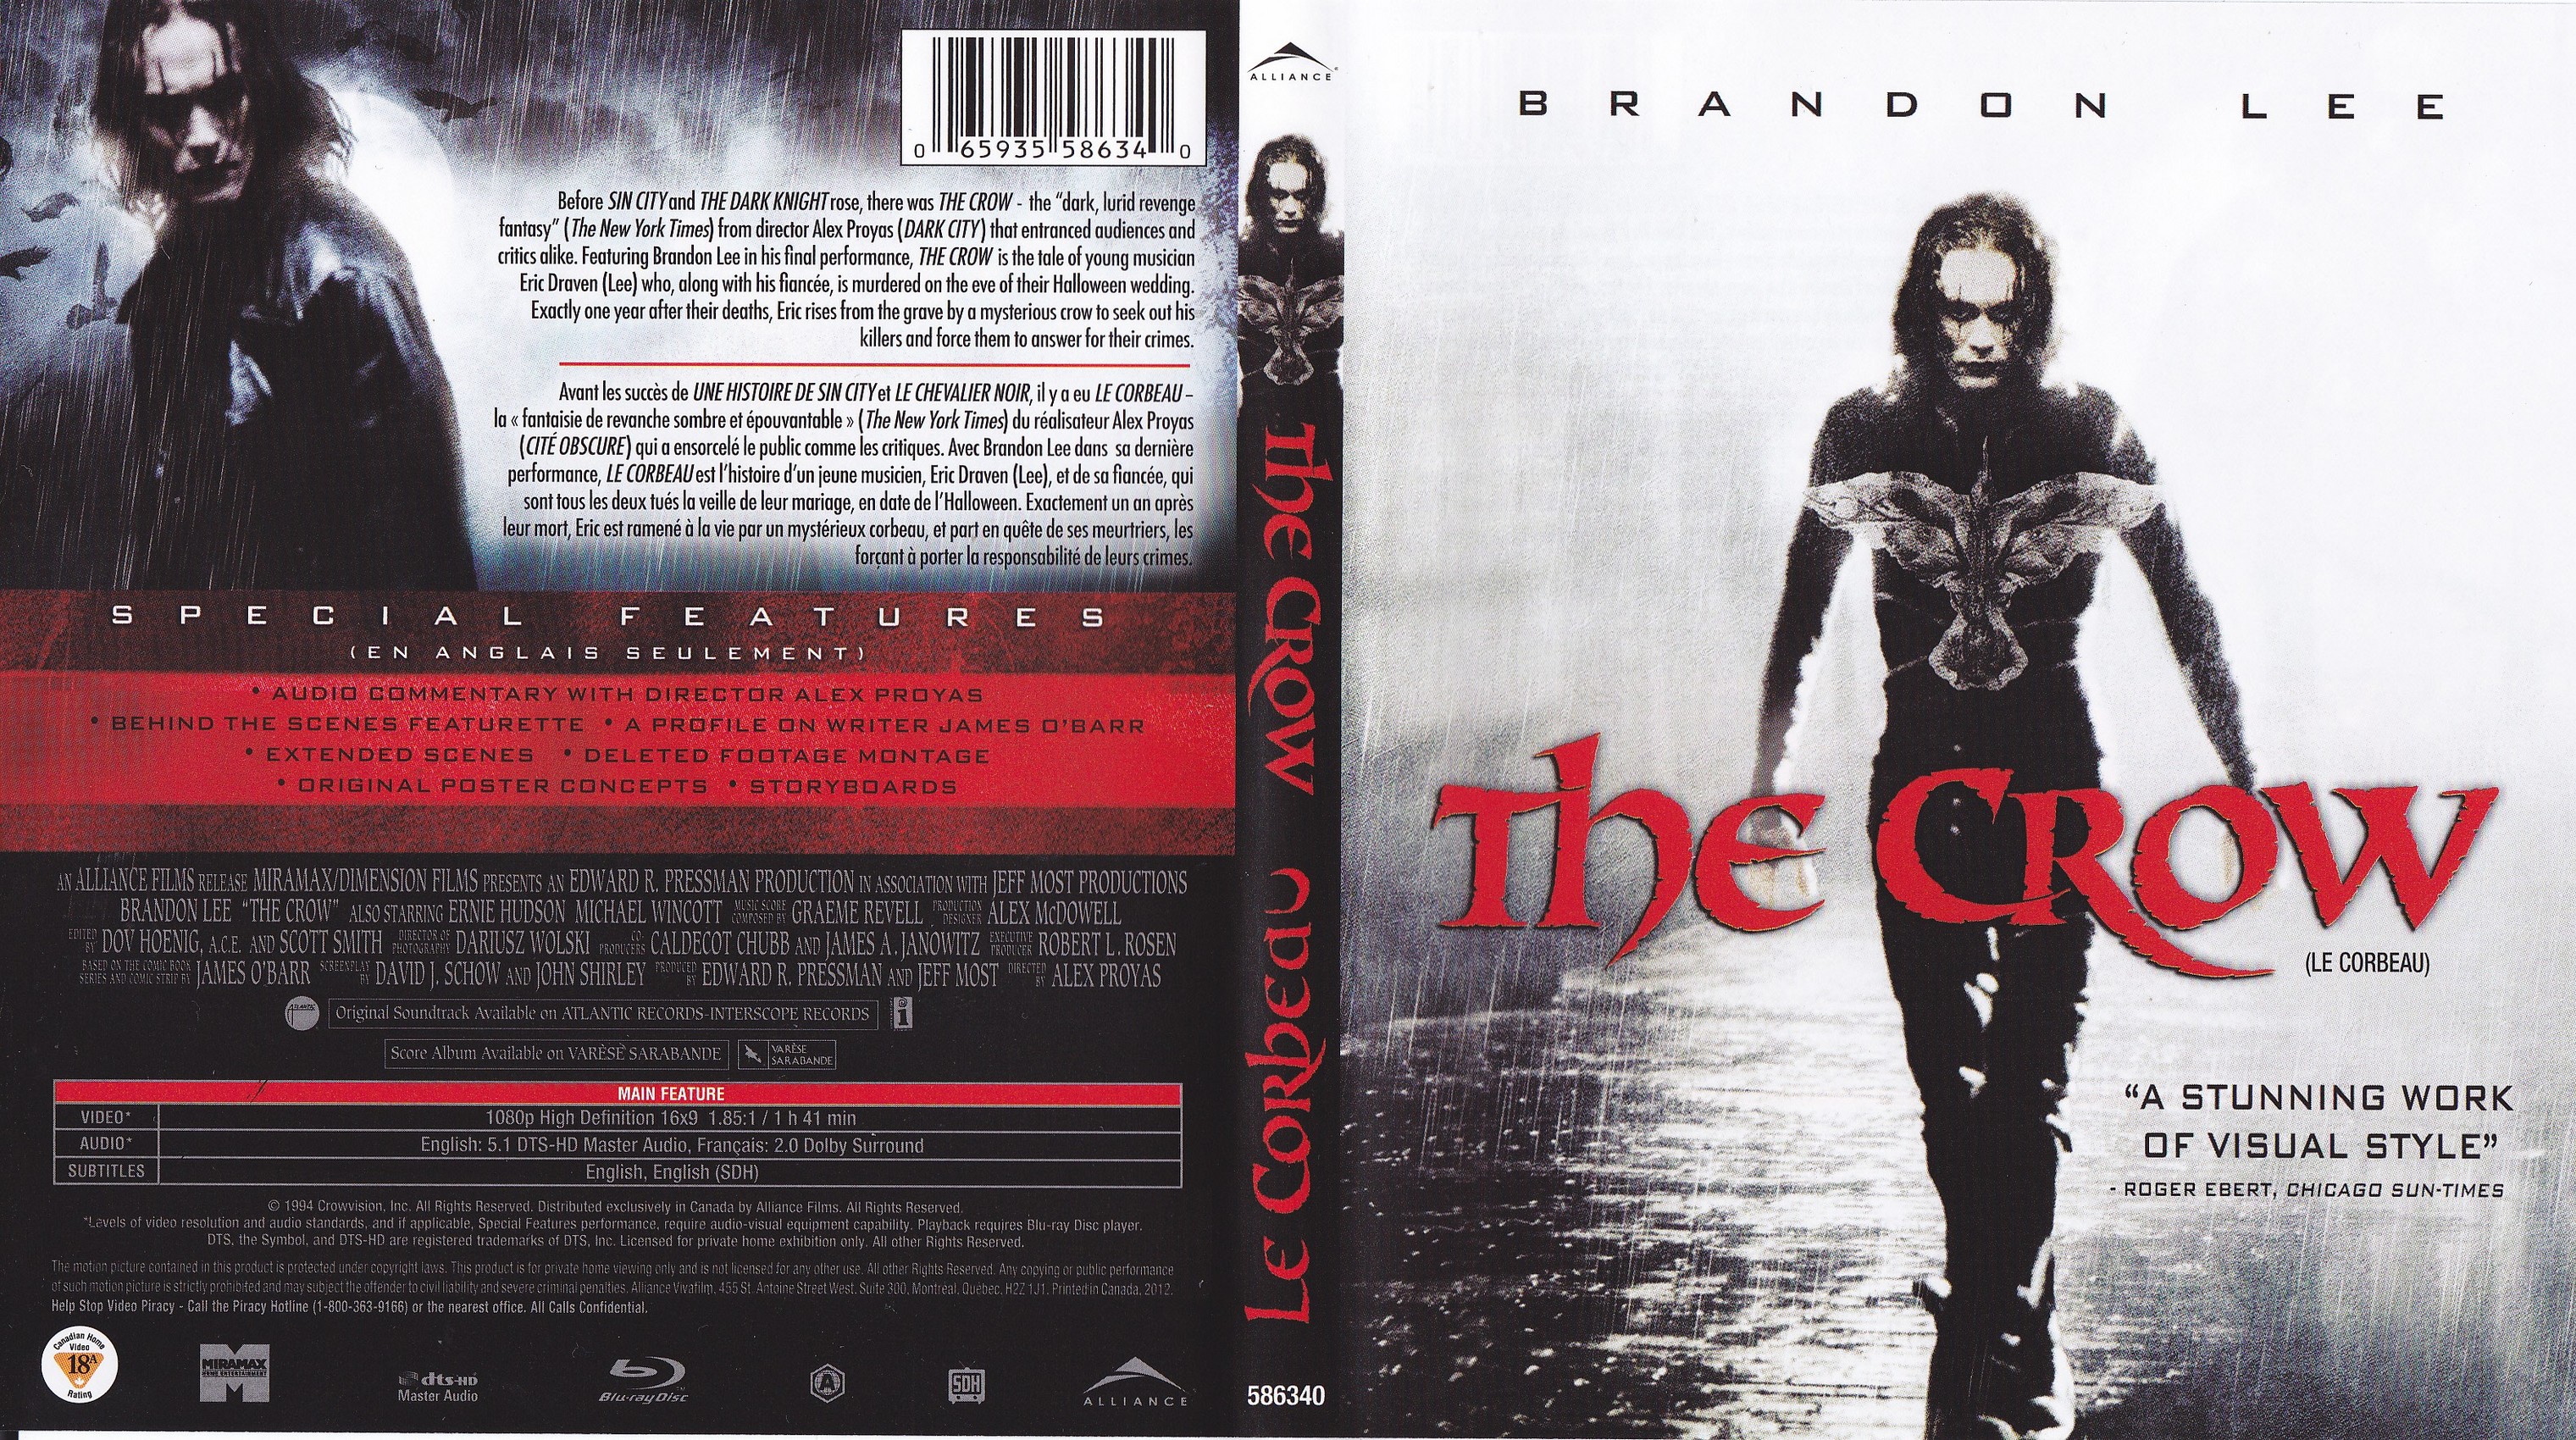 Jaquette DVD The crow - Le corbeau (Canadienne) (BLU-RAY)